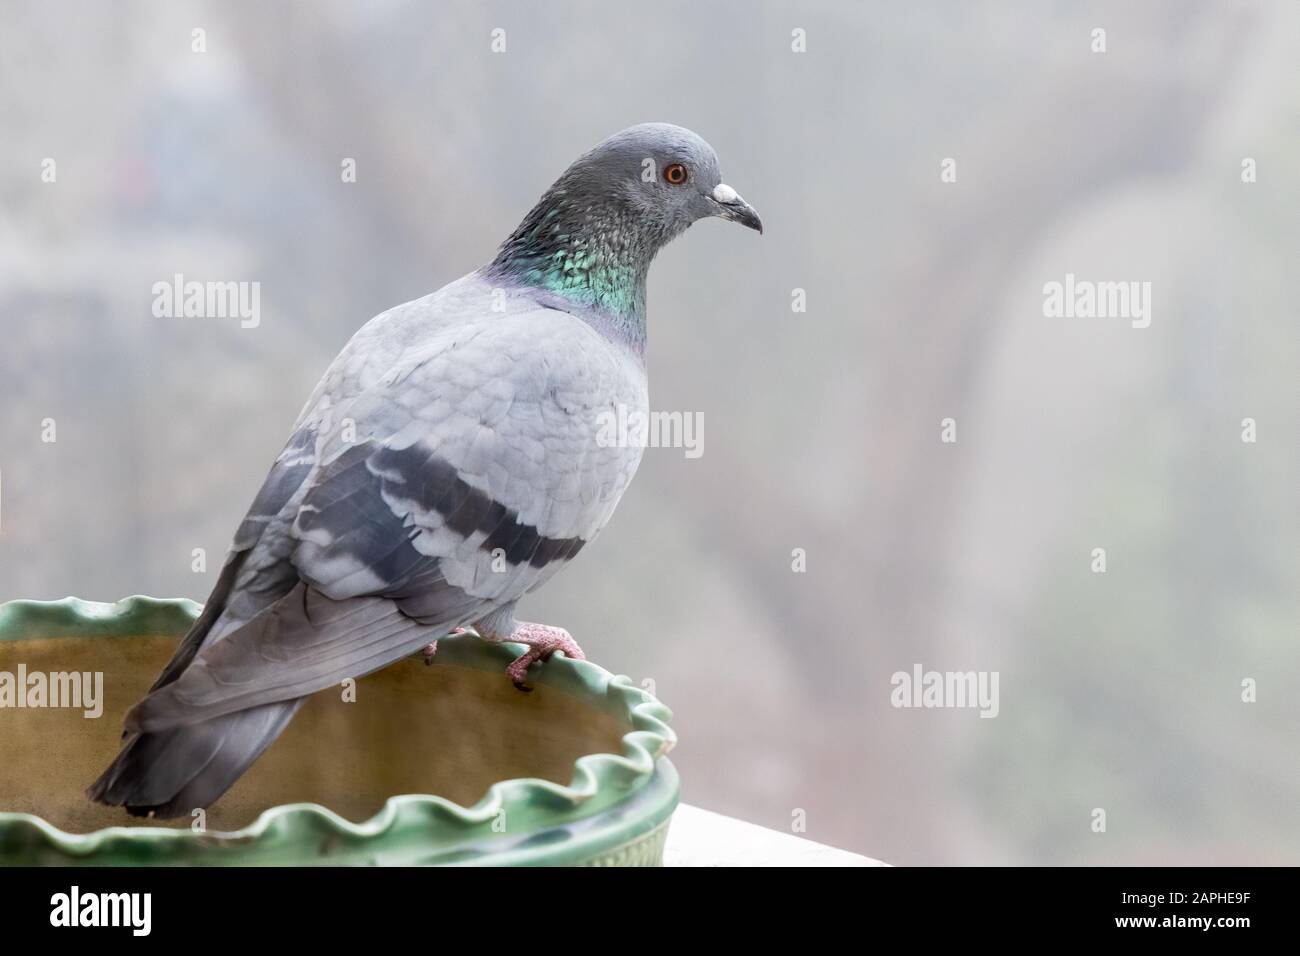 Portrait of an Indian Pigeon (Columba livia) in New Delhi, India in winter Stock Photo